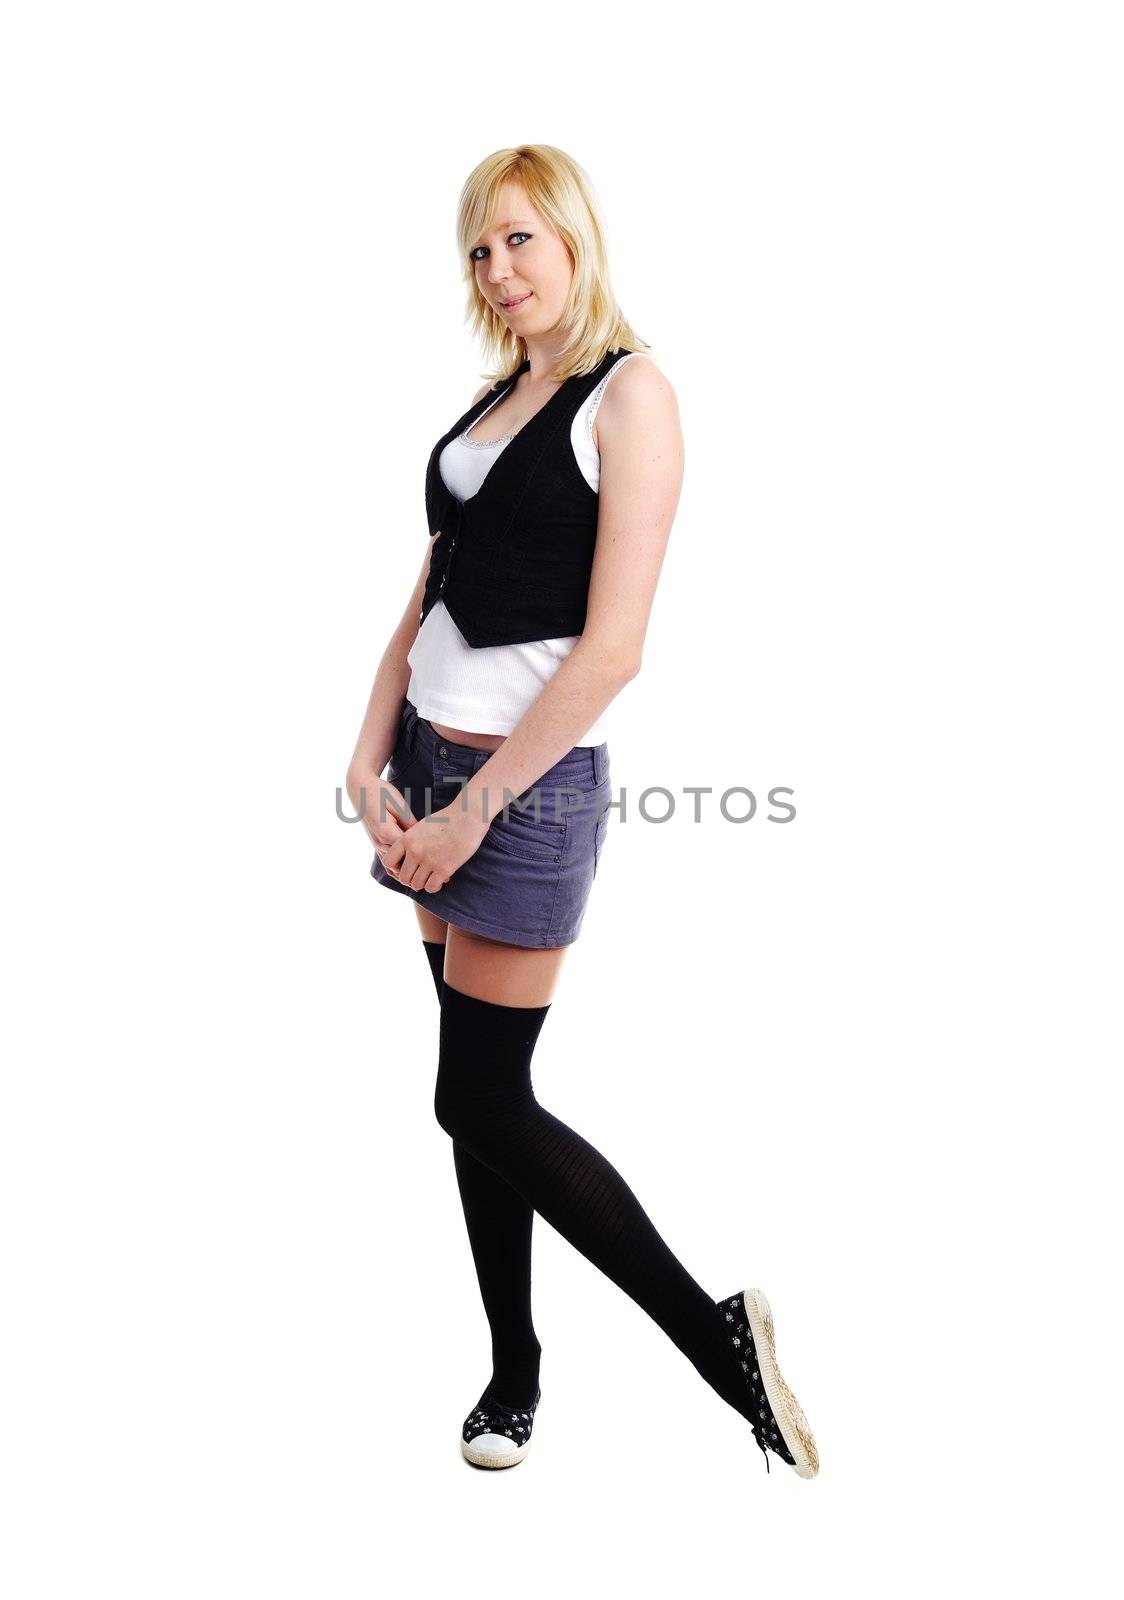 An image of a beautiful young girl in black stockings